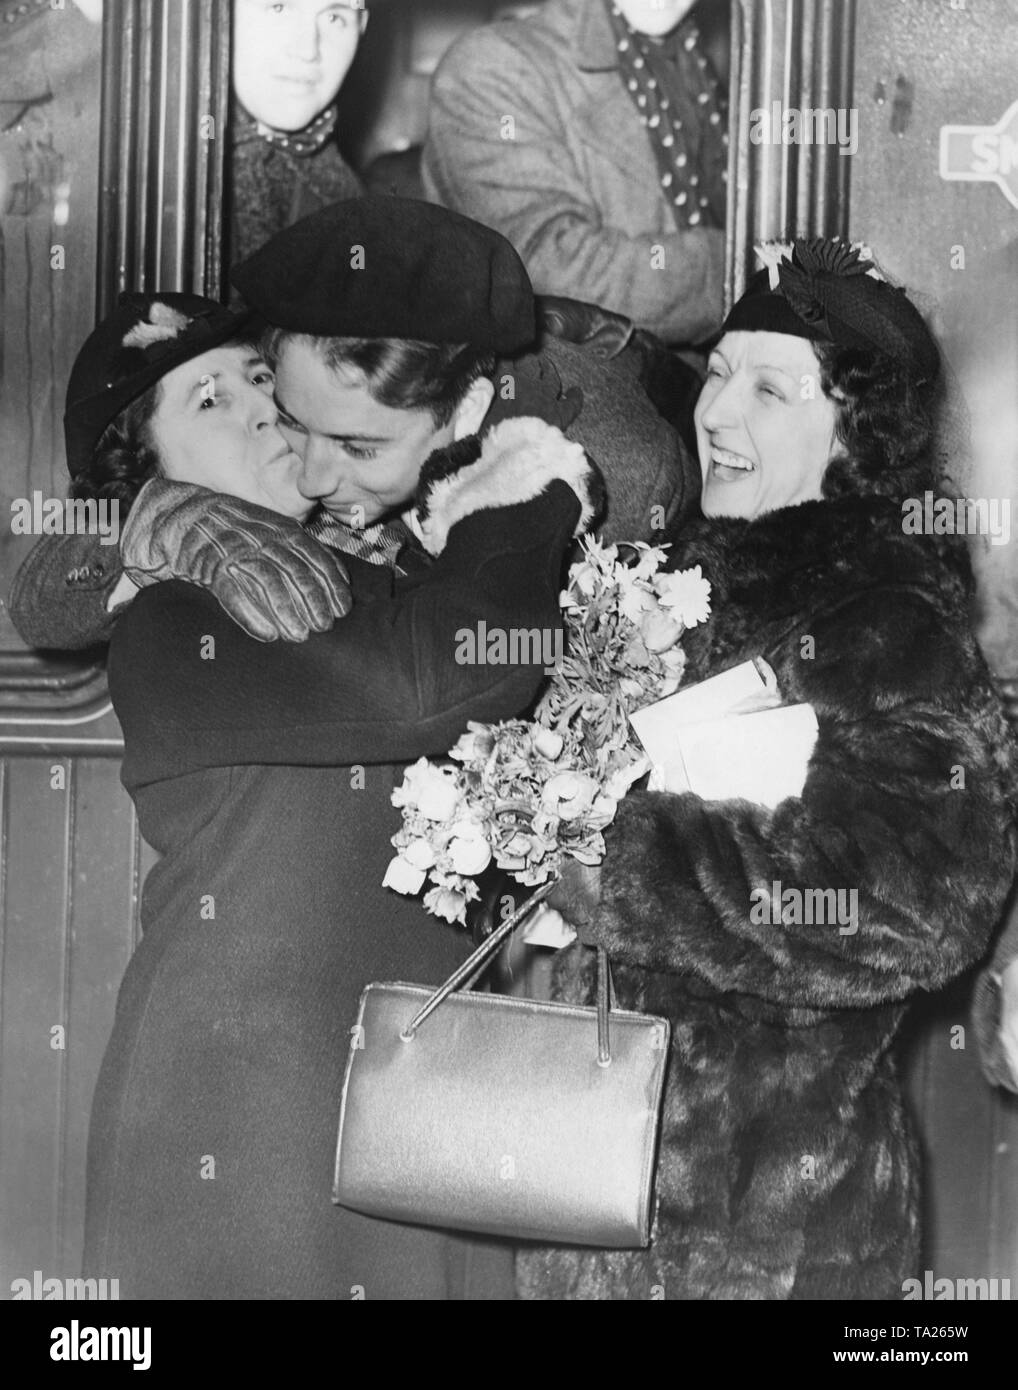 Photo of a voluntary Republican fighter of the Civil War, who is kissed by two women at Victoria Station in London on their return from the Spanish Civil War on the 7th of December, 1938. The 400 fighters of the International Brigades were received at the station by a crowd and socialist officials. Stock Photo